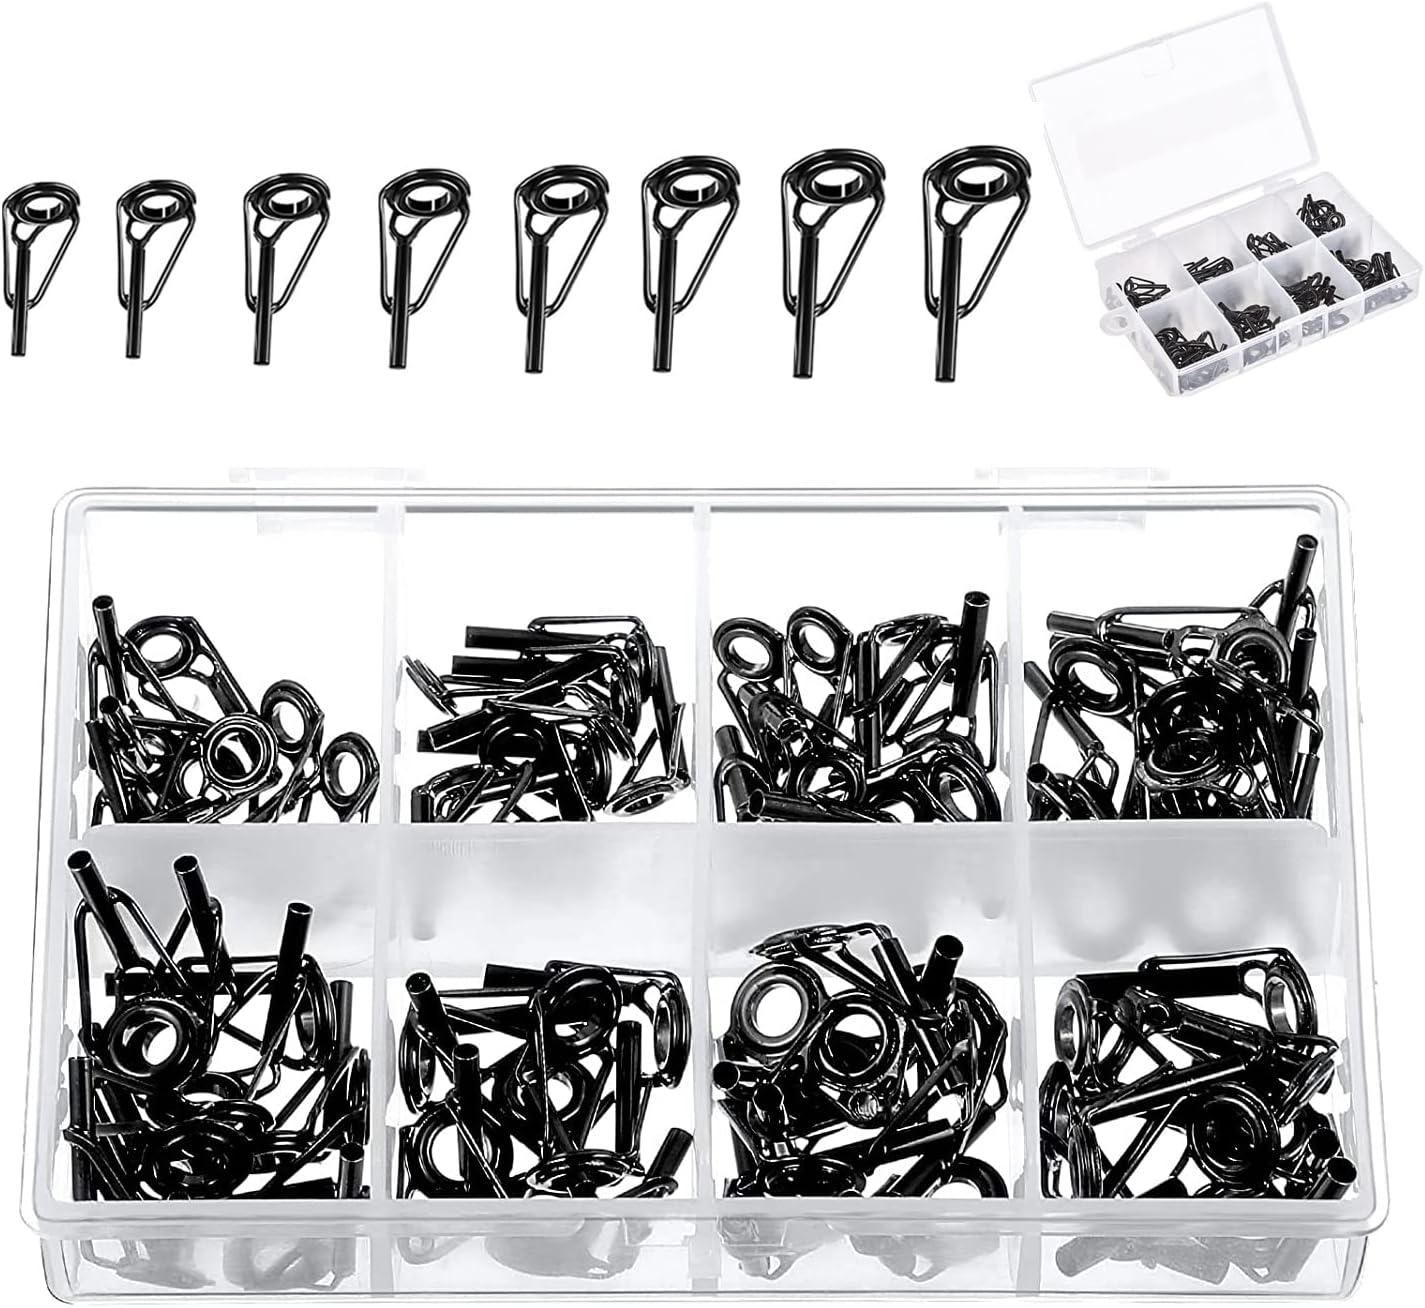 50 Pieces Fishing Rod Tip Repair Kit Rod Tips Kit Replacement for Freshwater  Saltwater Rods Stainless Steel Ceramic Ring Guide Replacement Kit 50 Pcs